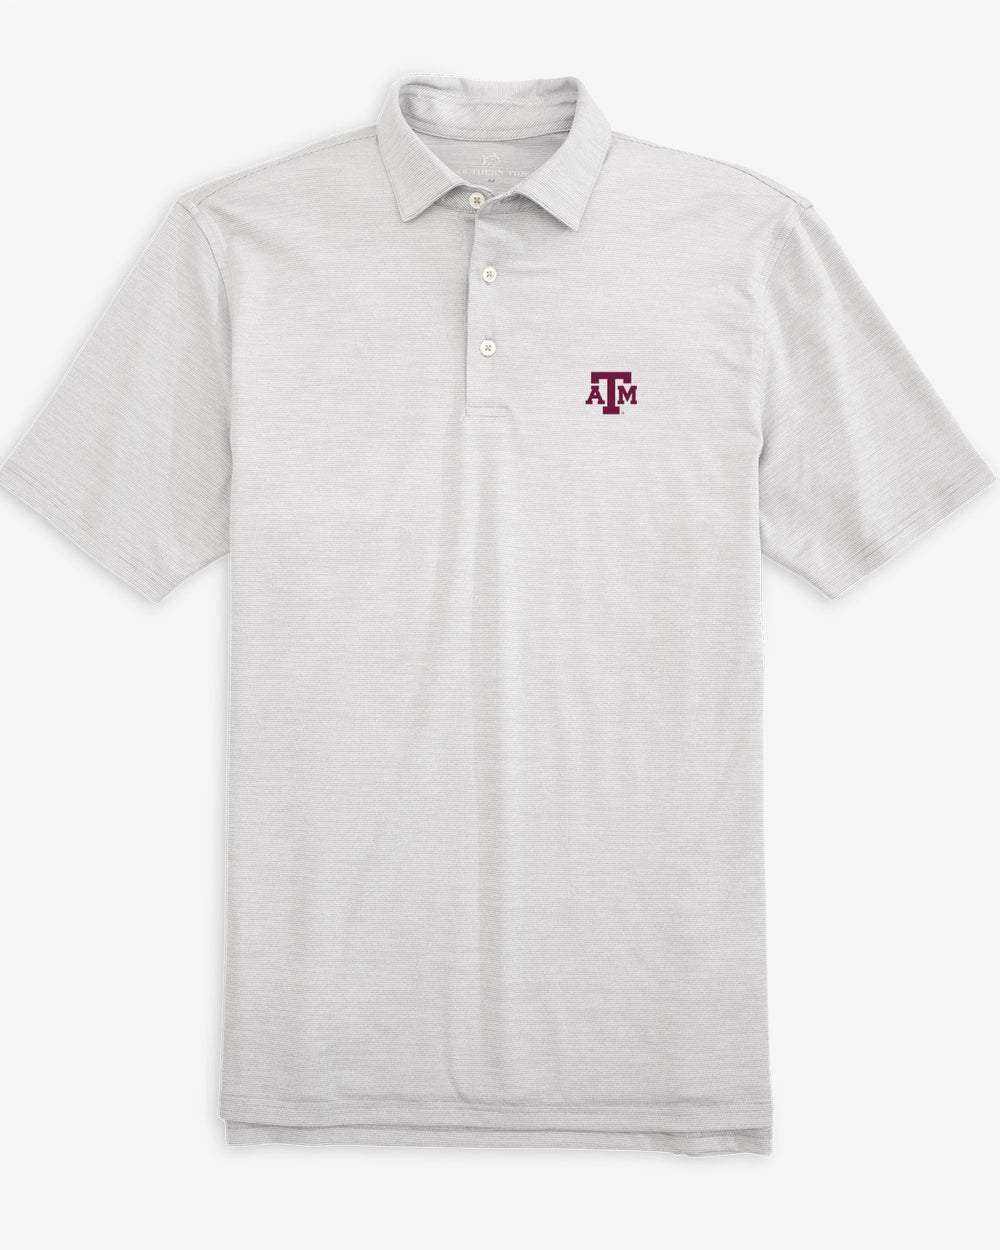 The front view of the Texas A&M Aggies Driver Spacedye Polo Shirt by Southern Tide - Slate Grey